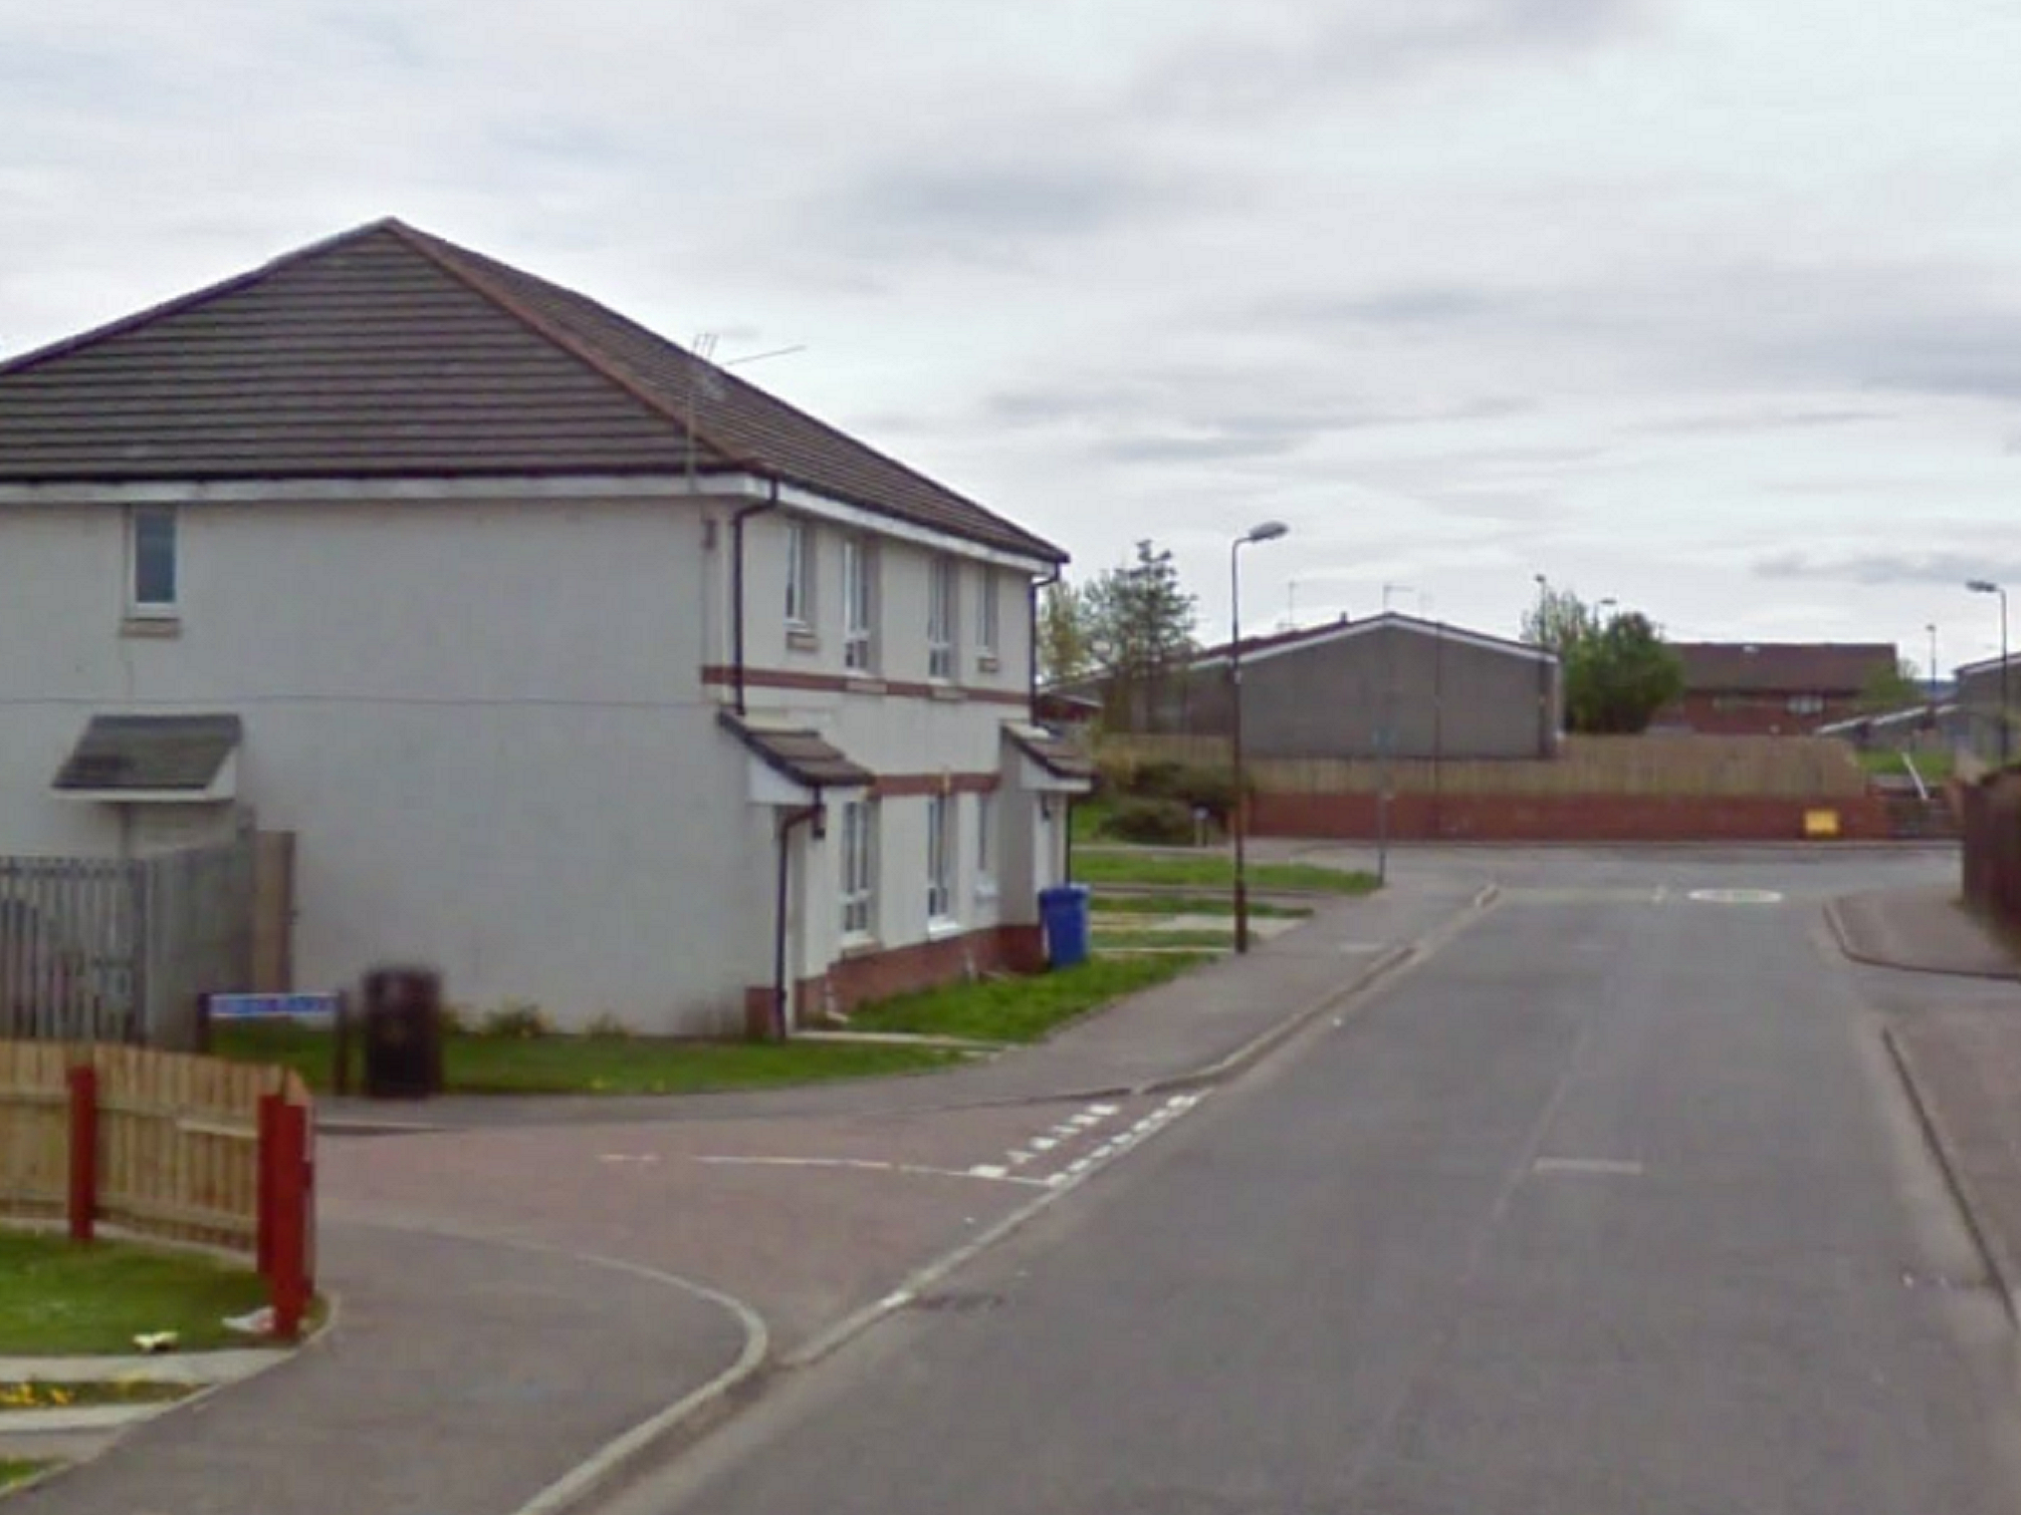 Police were called to Rowan Place shortly after 10pm following reports of a targeted attack